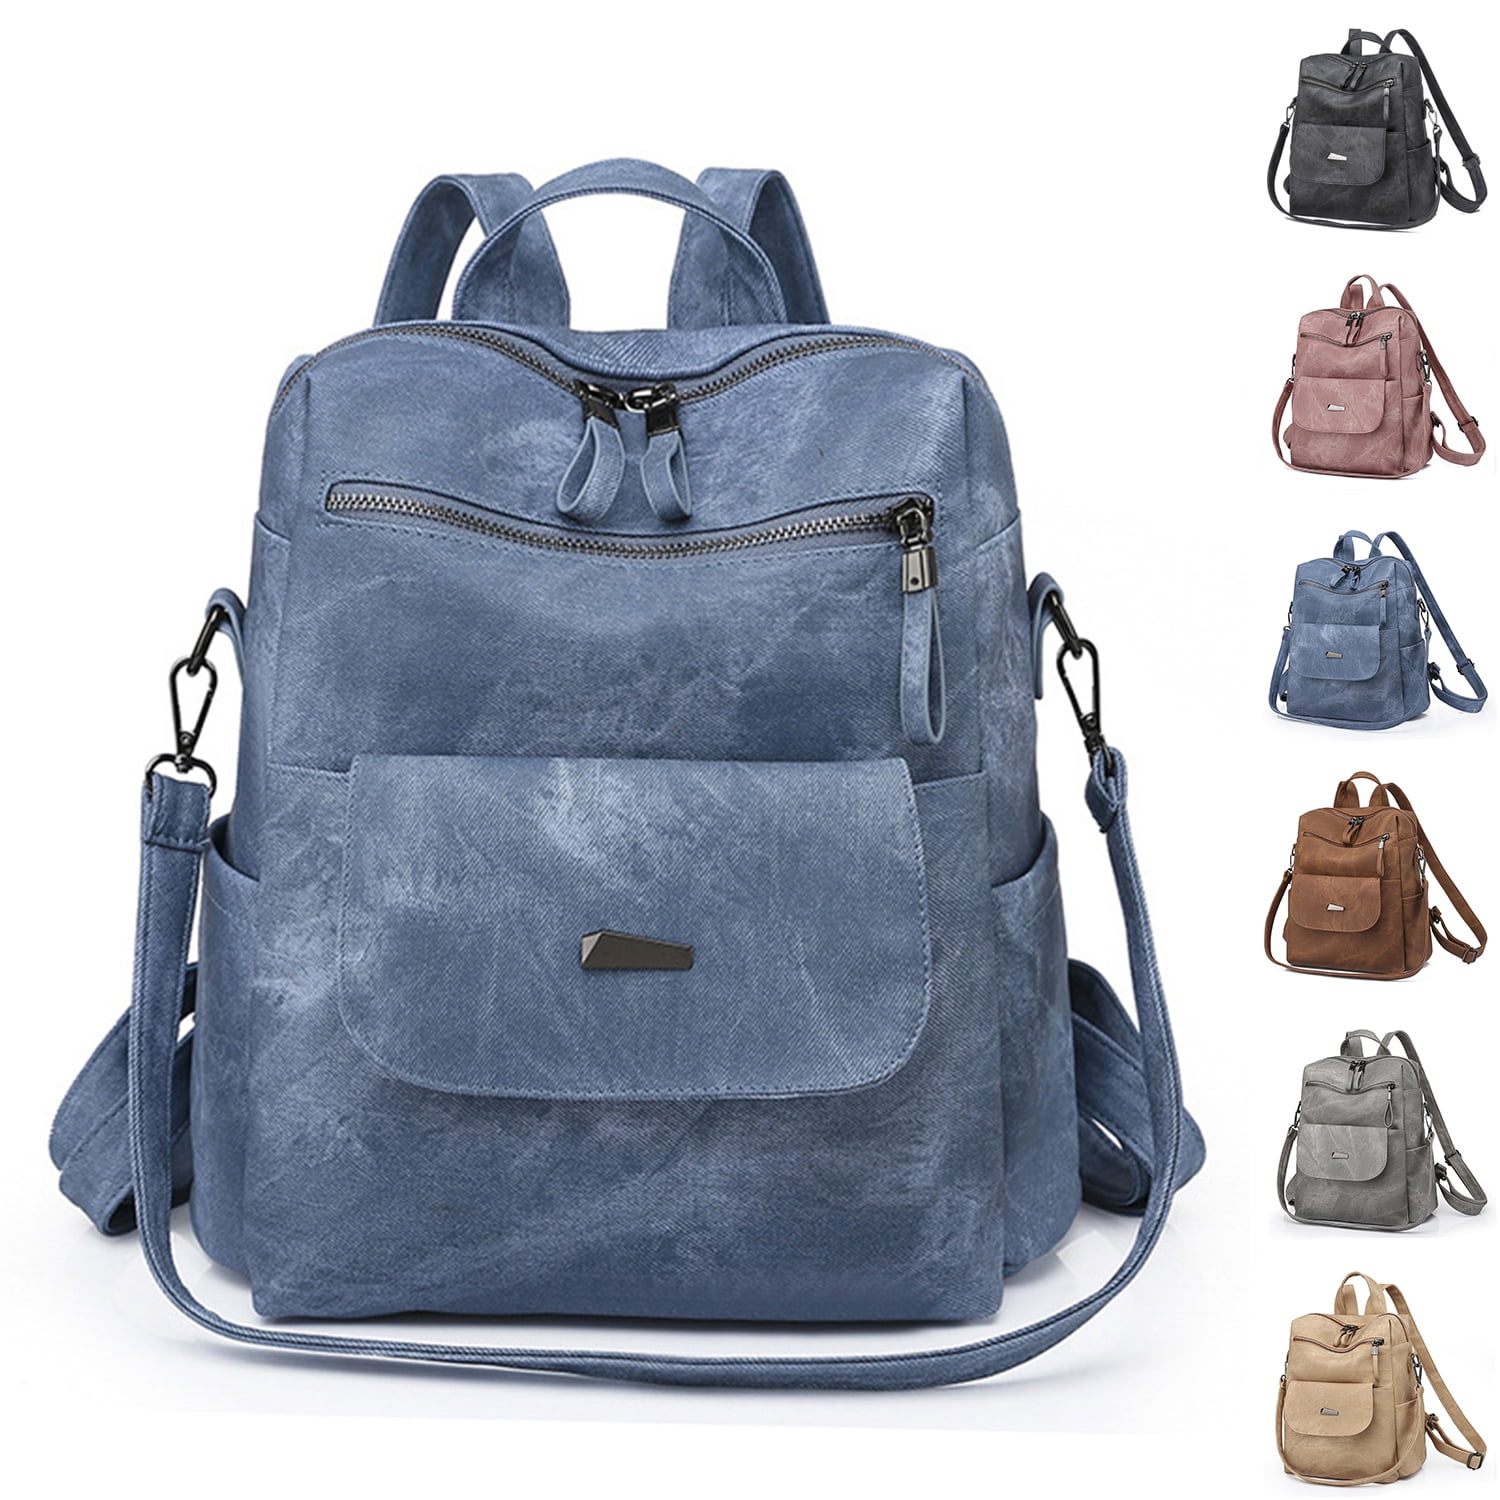 9 Travel Backpack Purses You Need For Your Next Trip | Backpackies